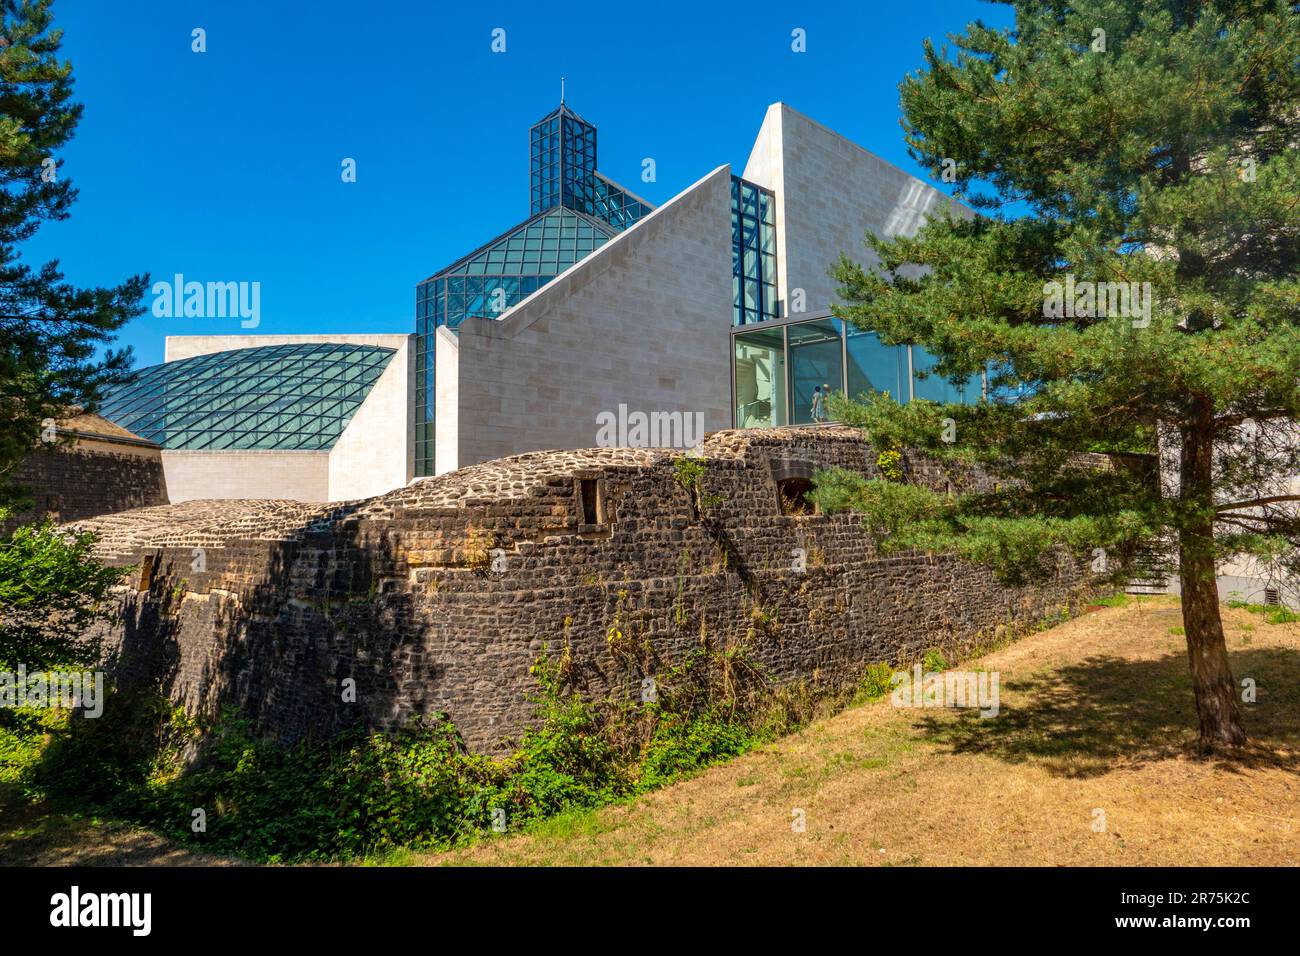 Musée MUDAM, Kirchberg, Luxembourg, Benelux, pays du Benelux, Luxembourg Banque D'Images